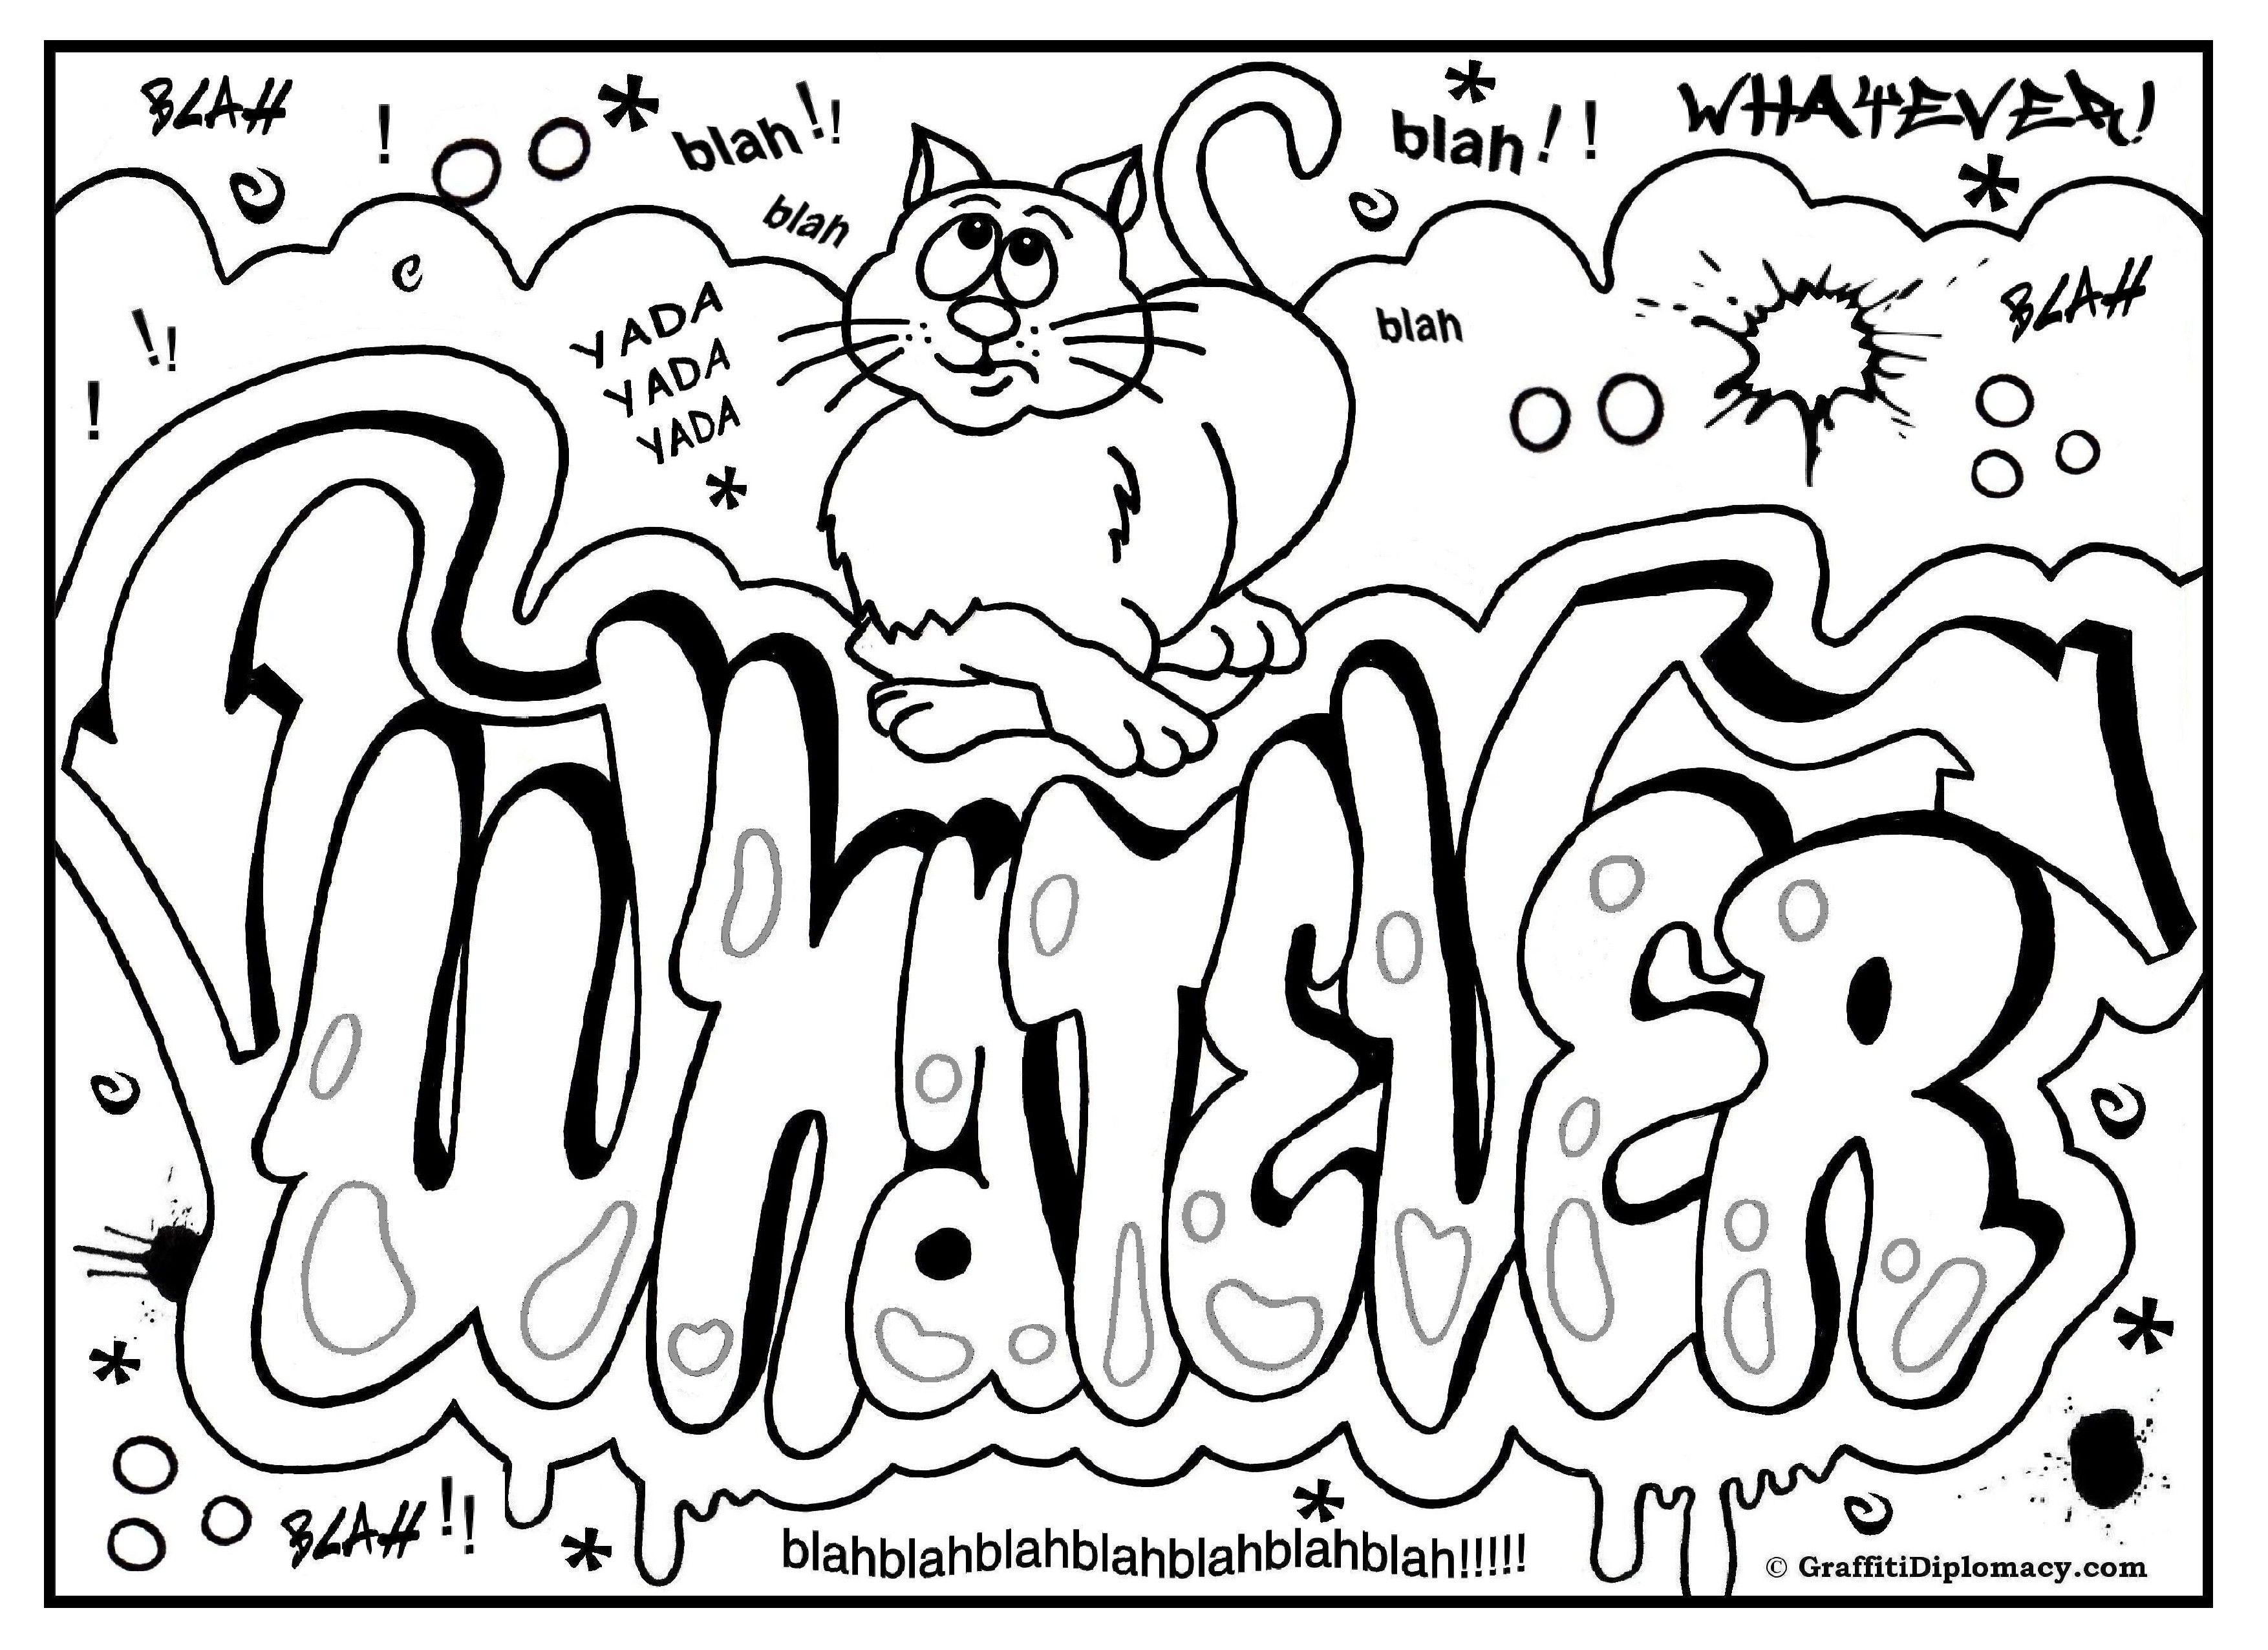 Graffiti Coloring Page, Free Printable Graffiti Room Signs | Free - Free Printable Coloring Pages For Adults Only Swear Words